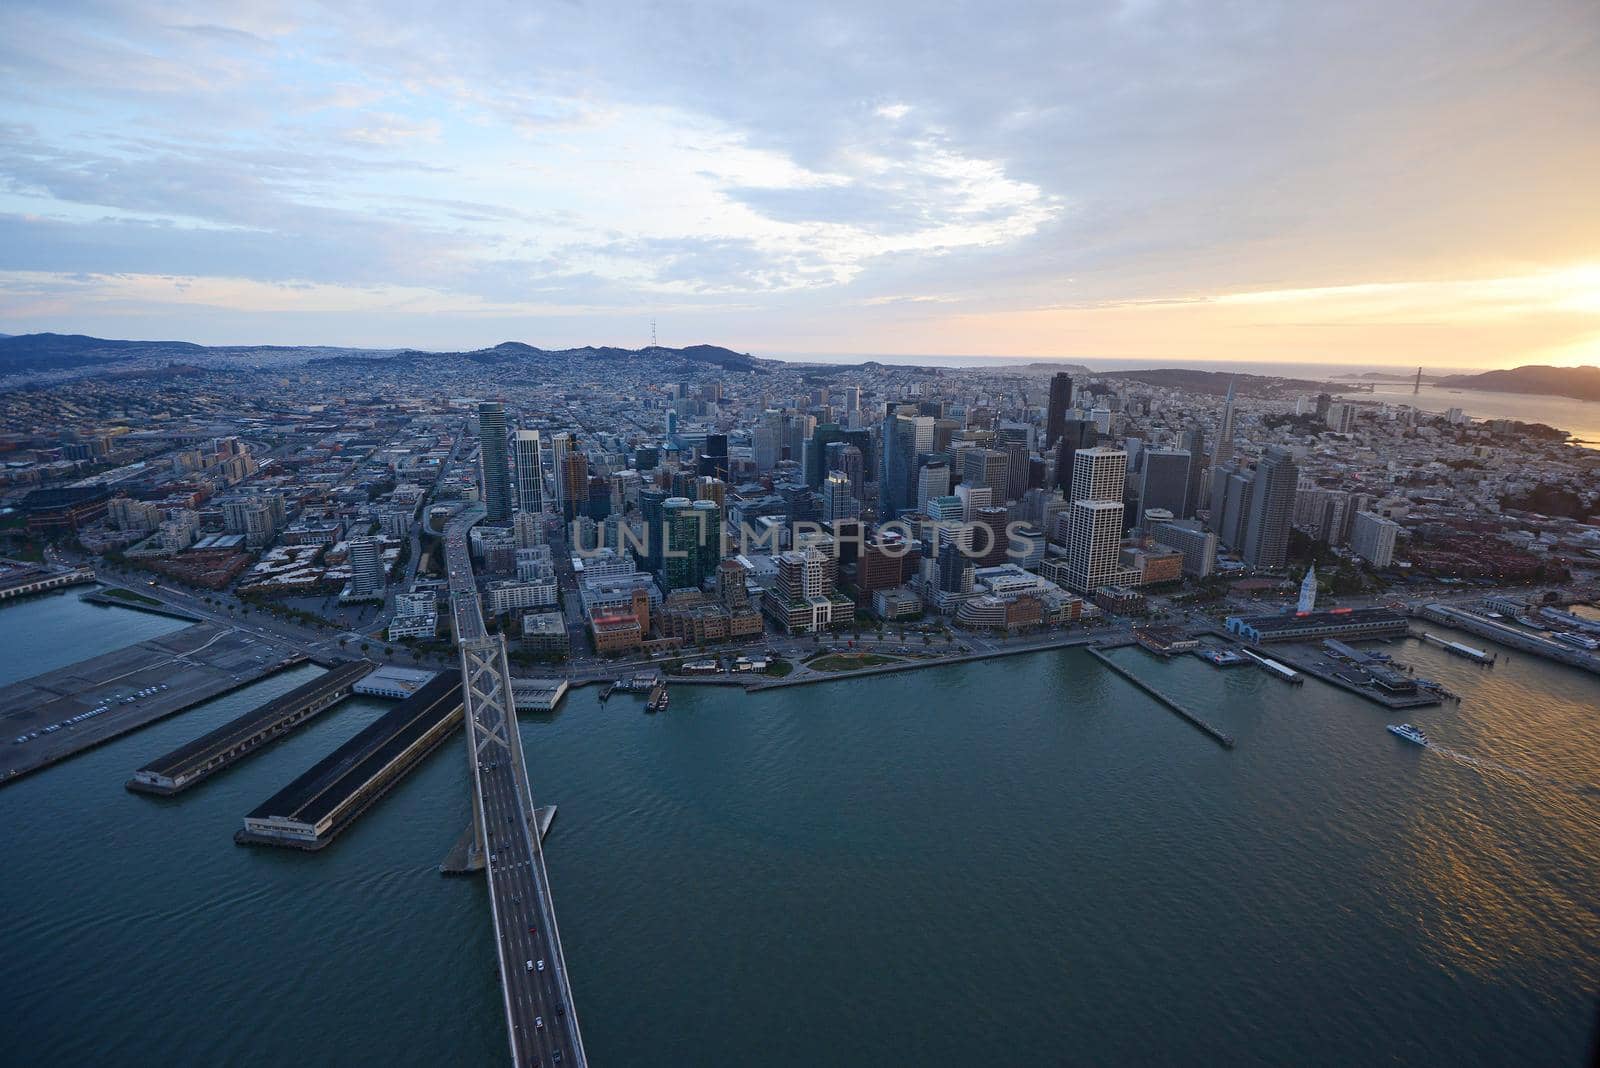 bay bridge from helicopter by porbital